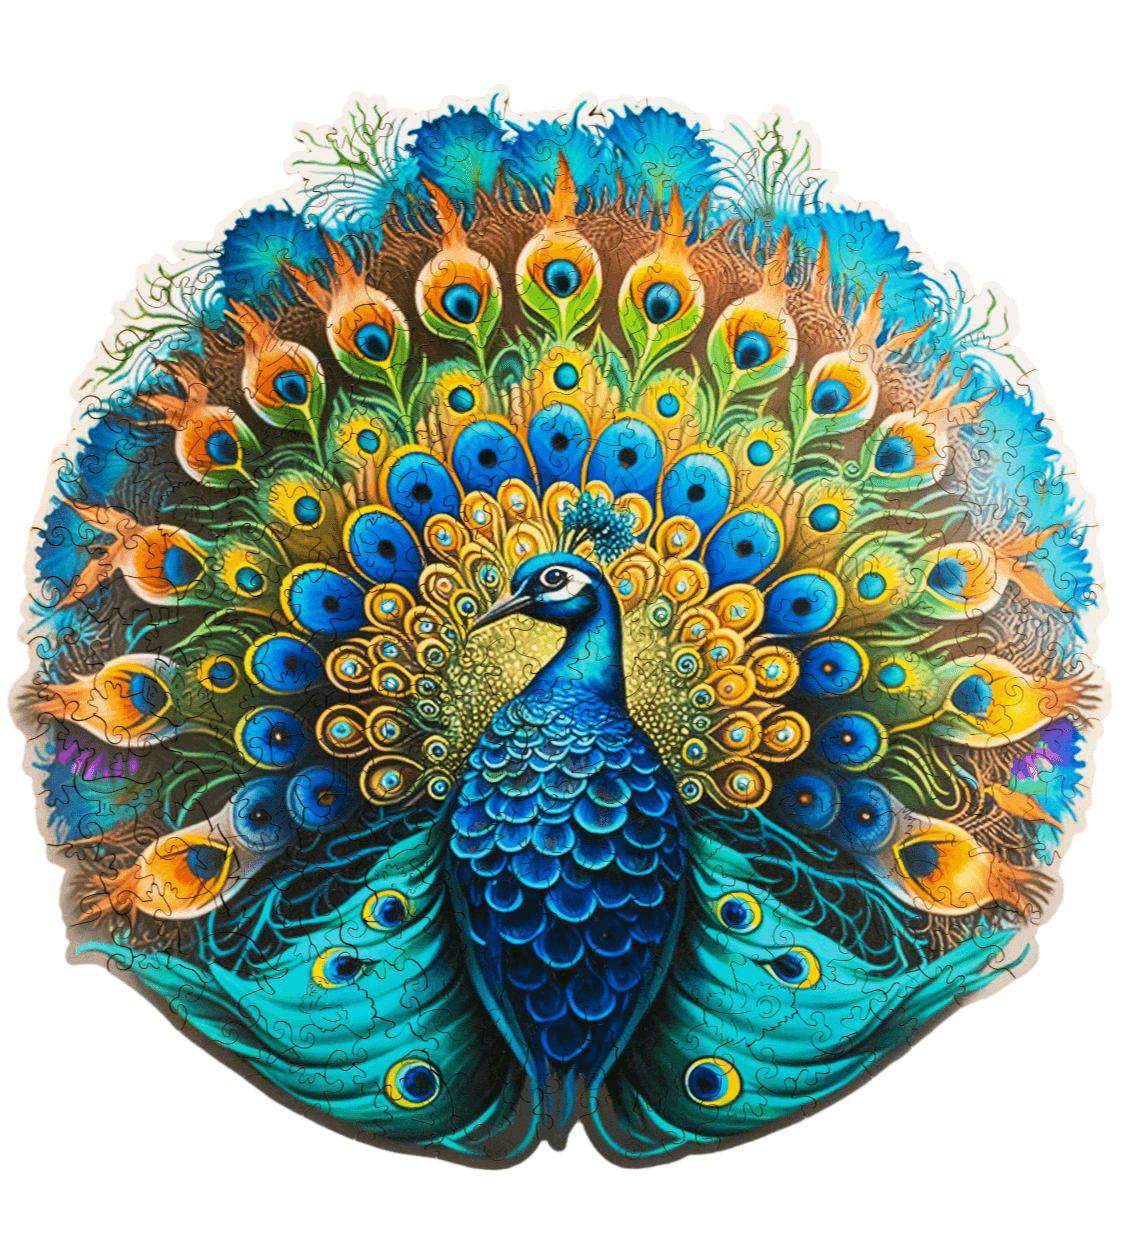 Wooden puzzles - PW031e - Proud peacock Image 3